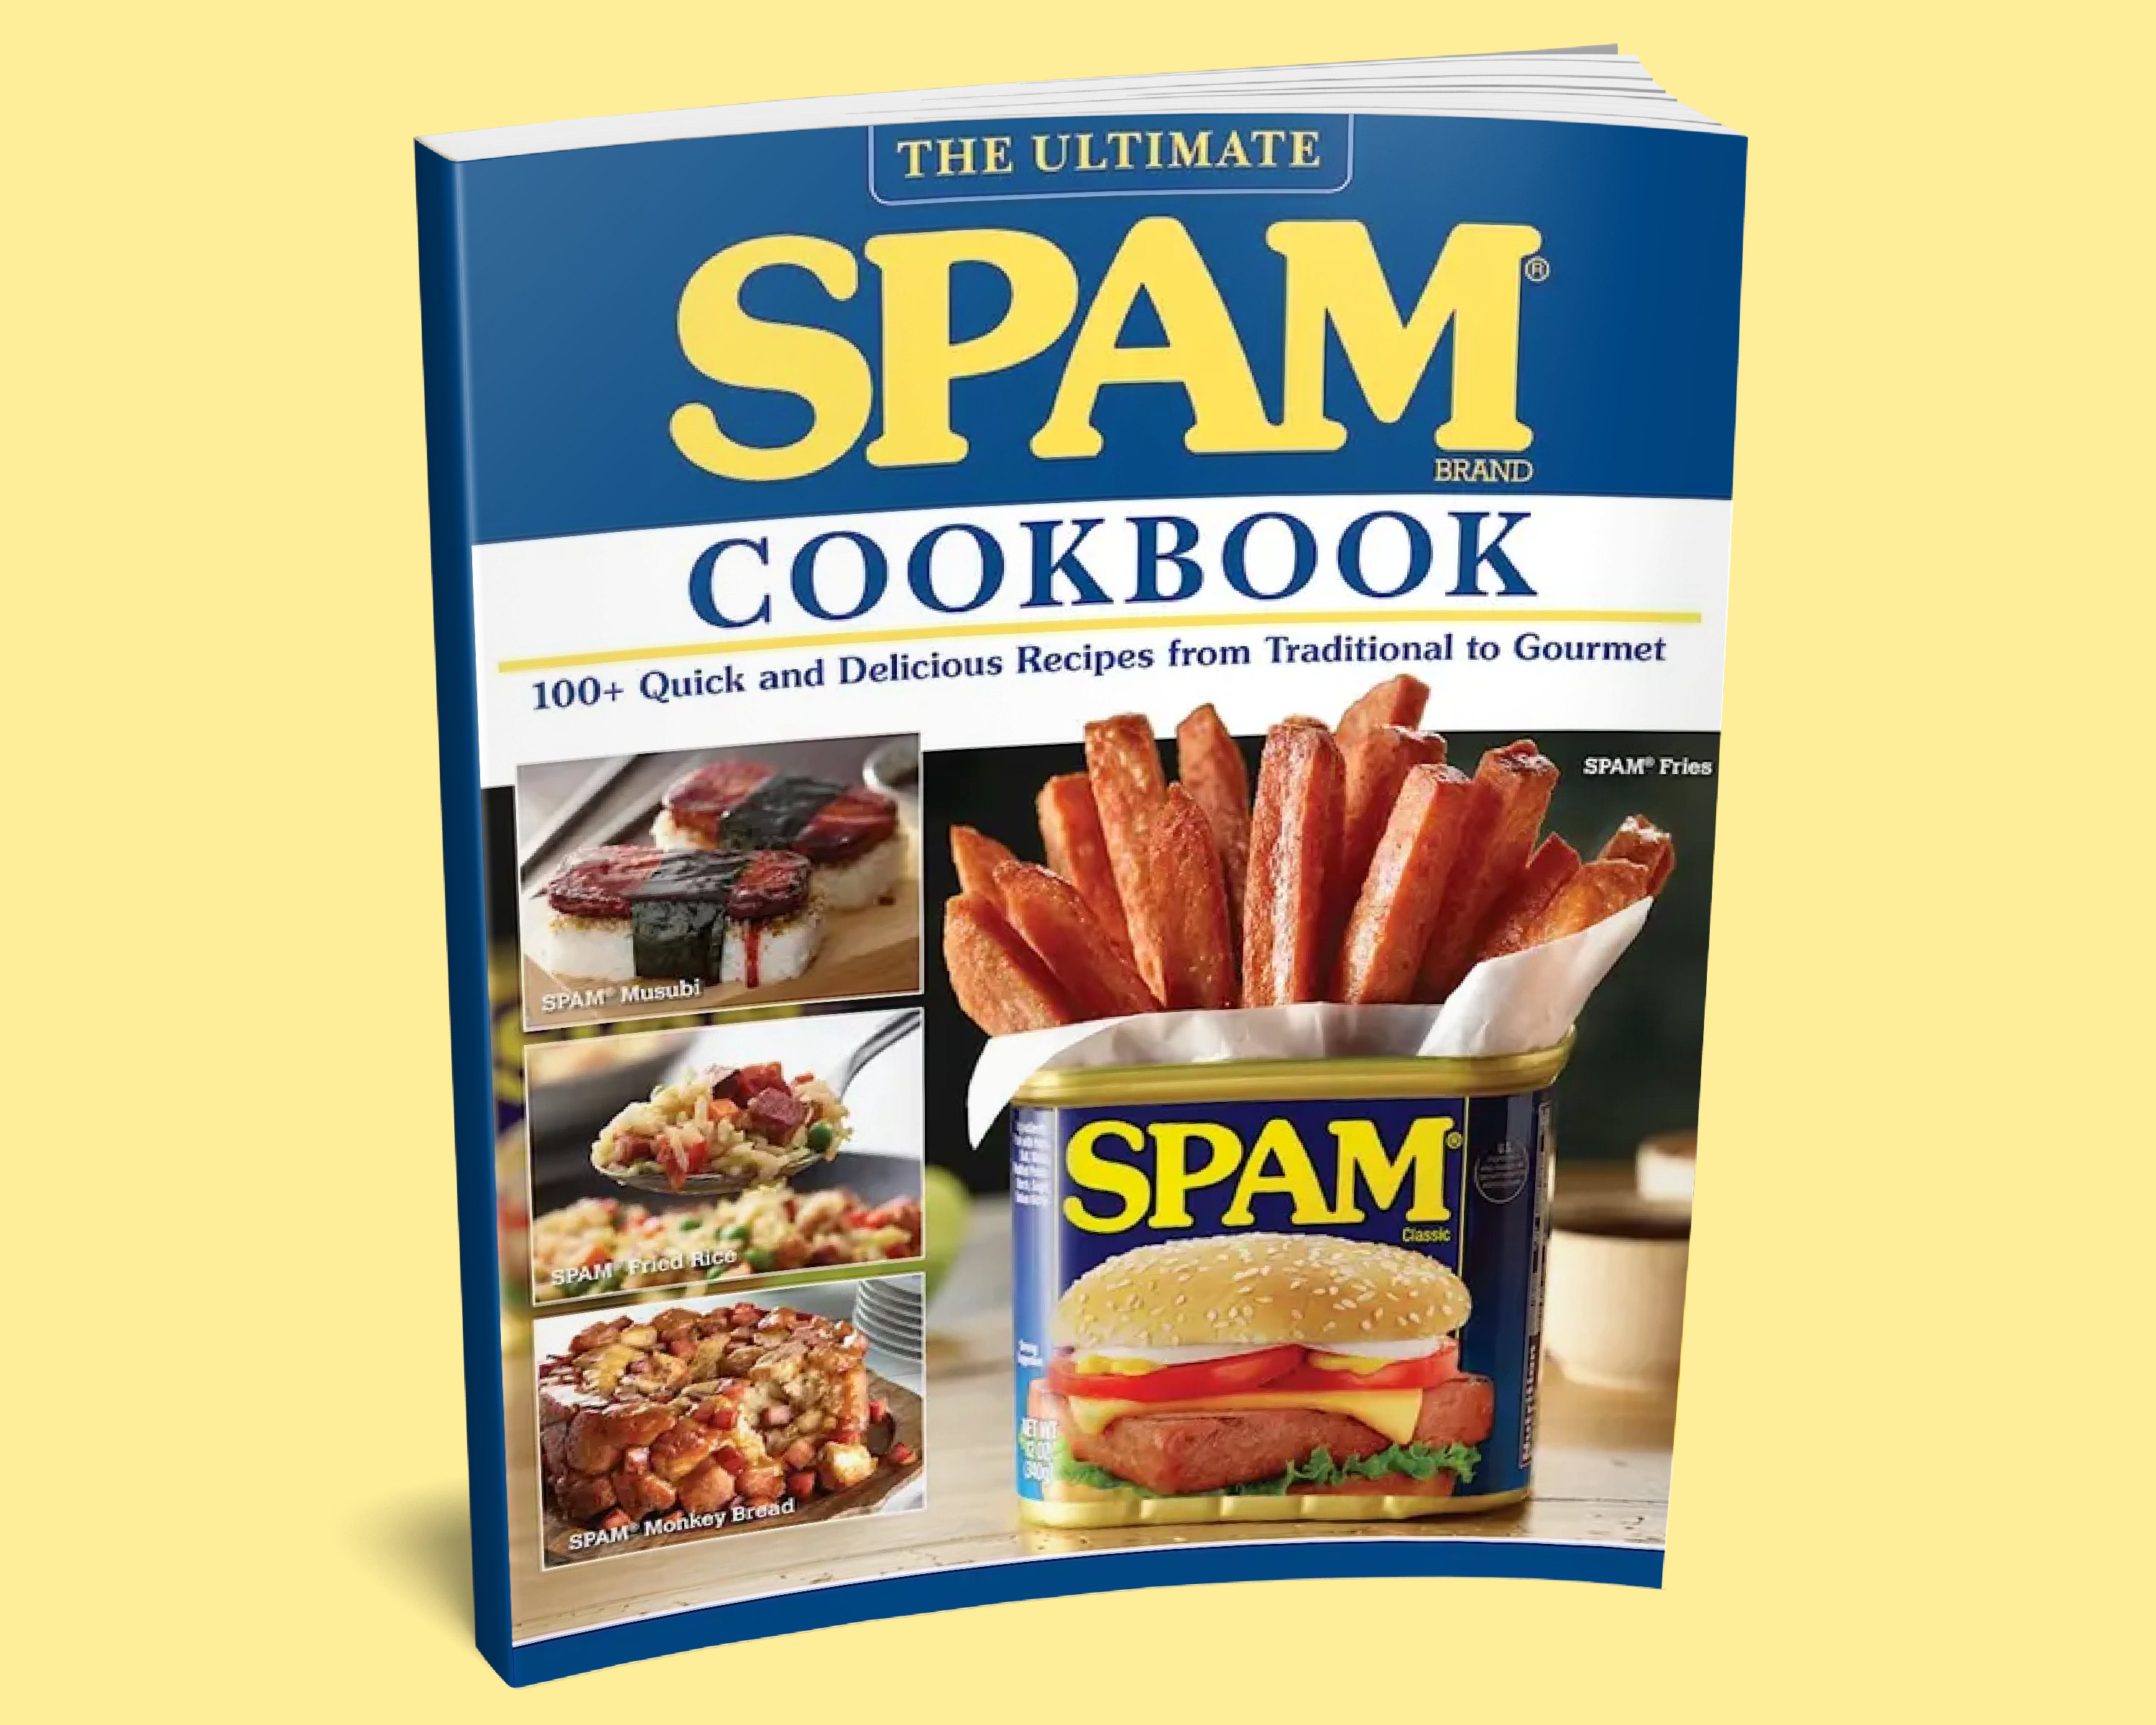 The Ultimate Spam Cookbook - Spam Recipes Musubi Hawaiian Spam Filipino Gift For Cooks